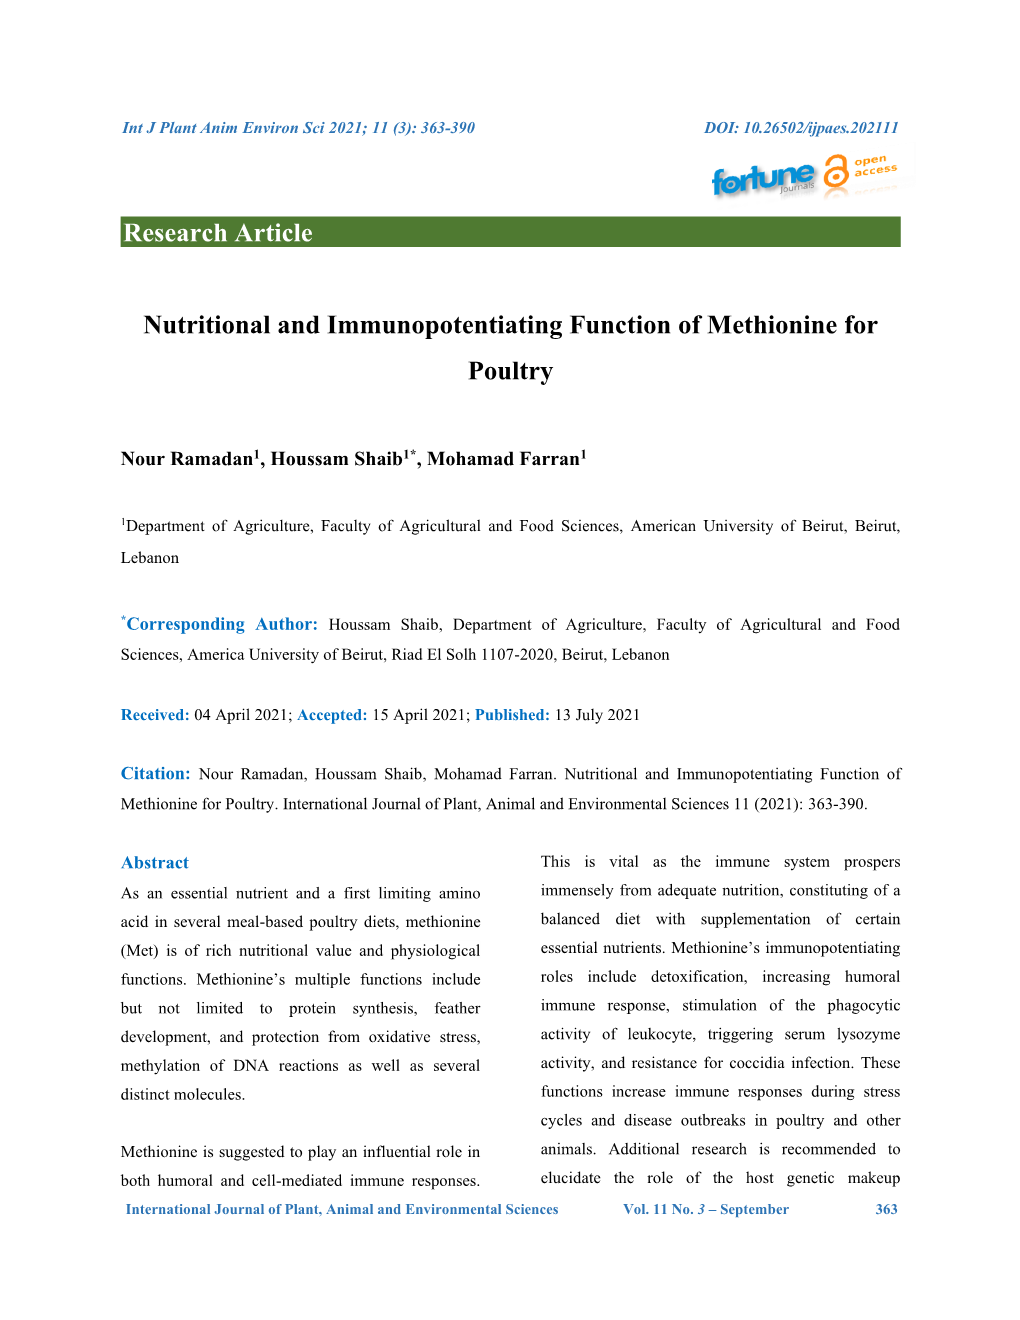 Nutritional and Immunopotentiating Function of Methionine for Poultry